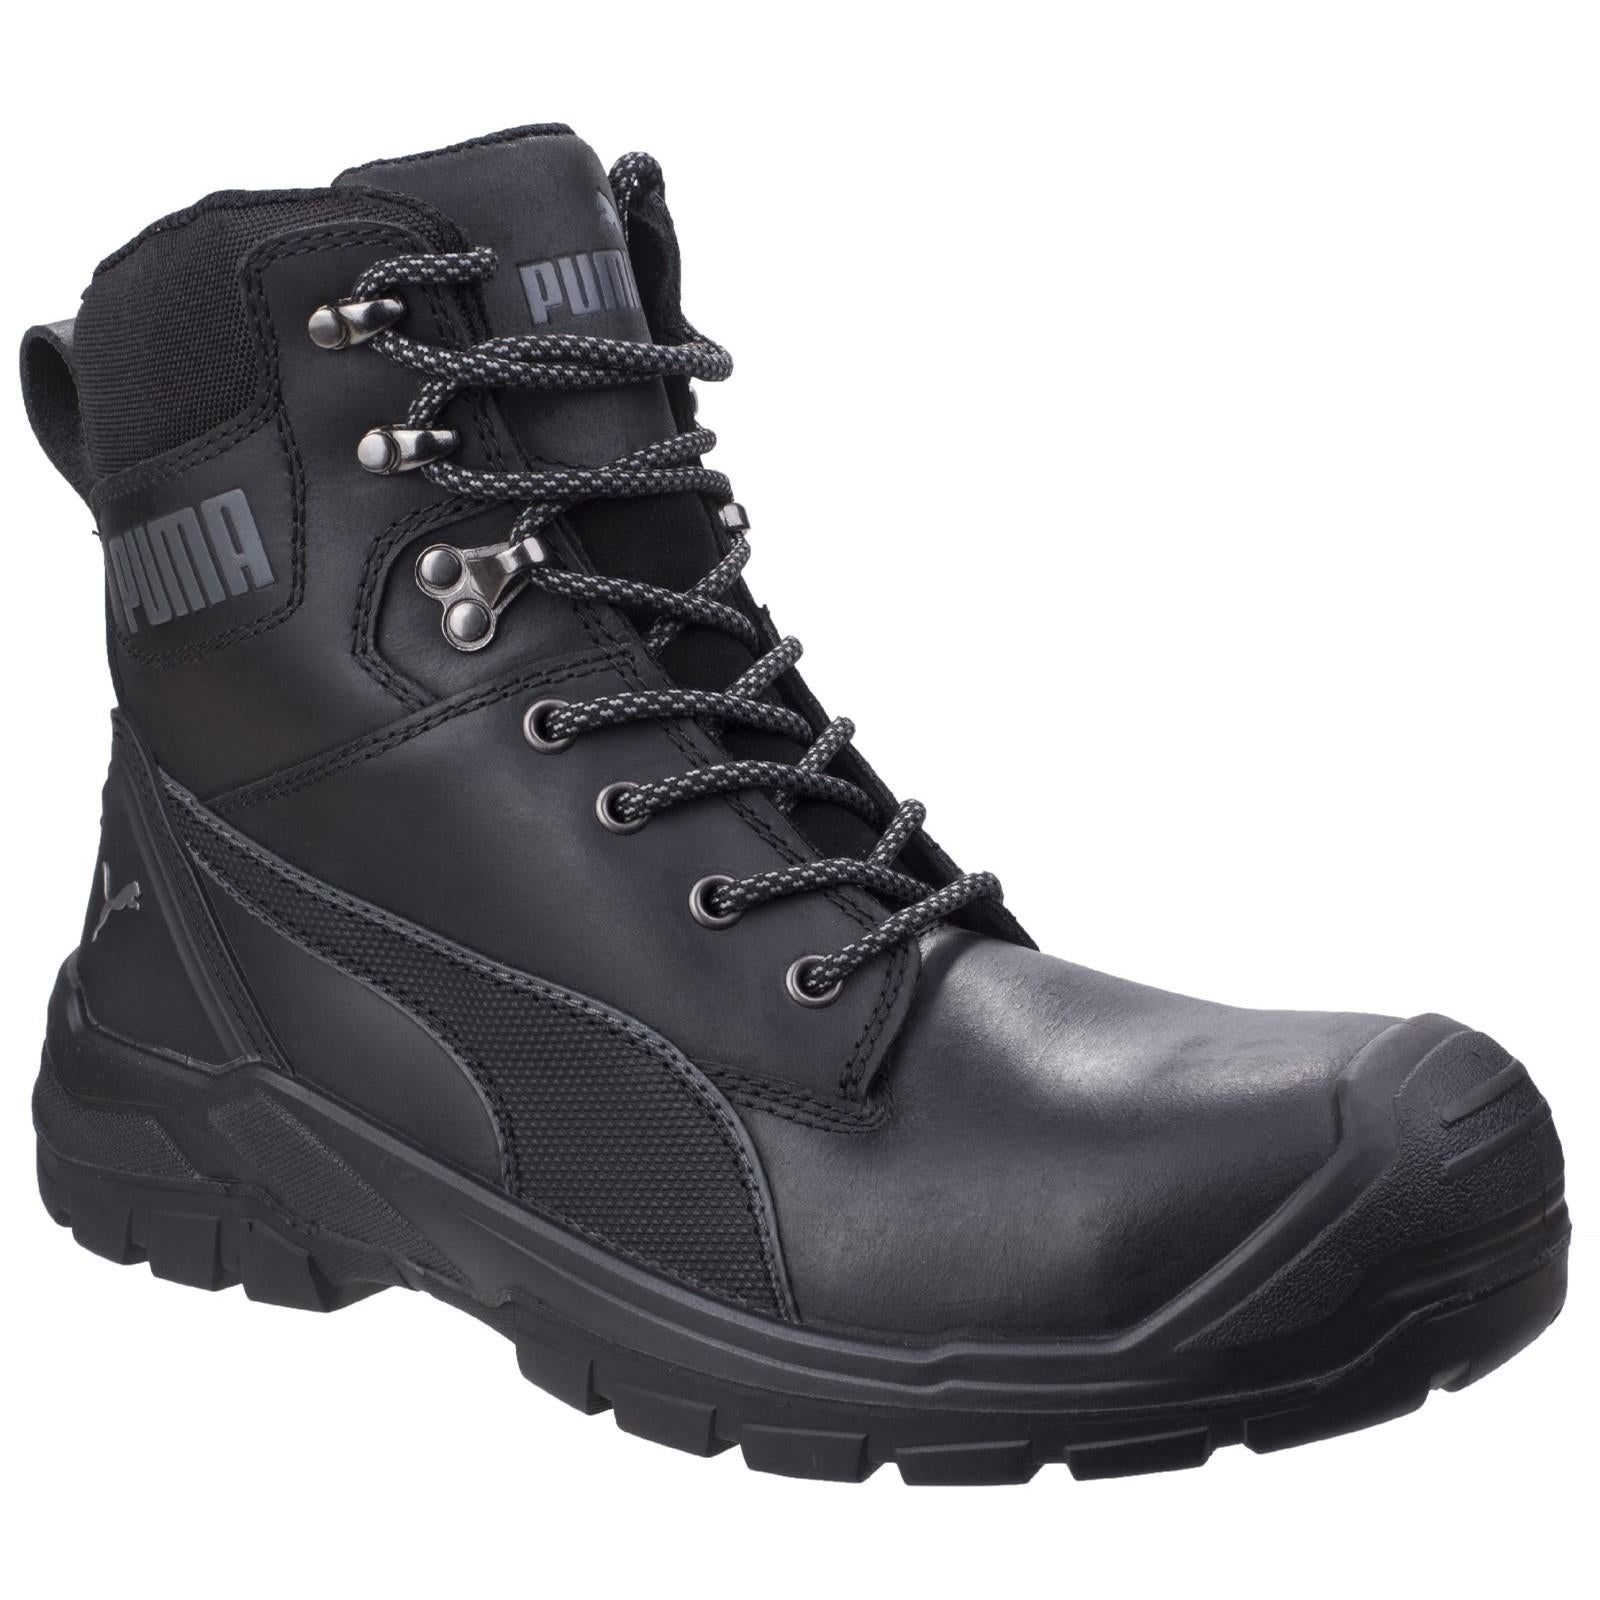 Puma Conquest S3 black side-zip composite toe safety boot with midsole